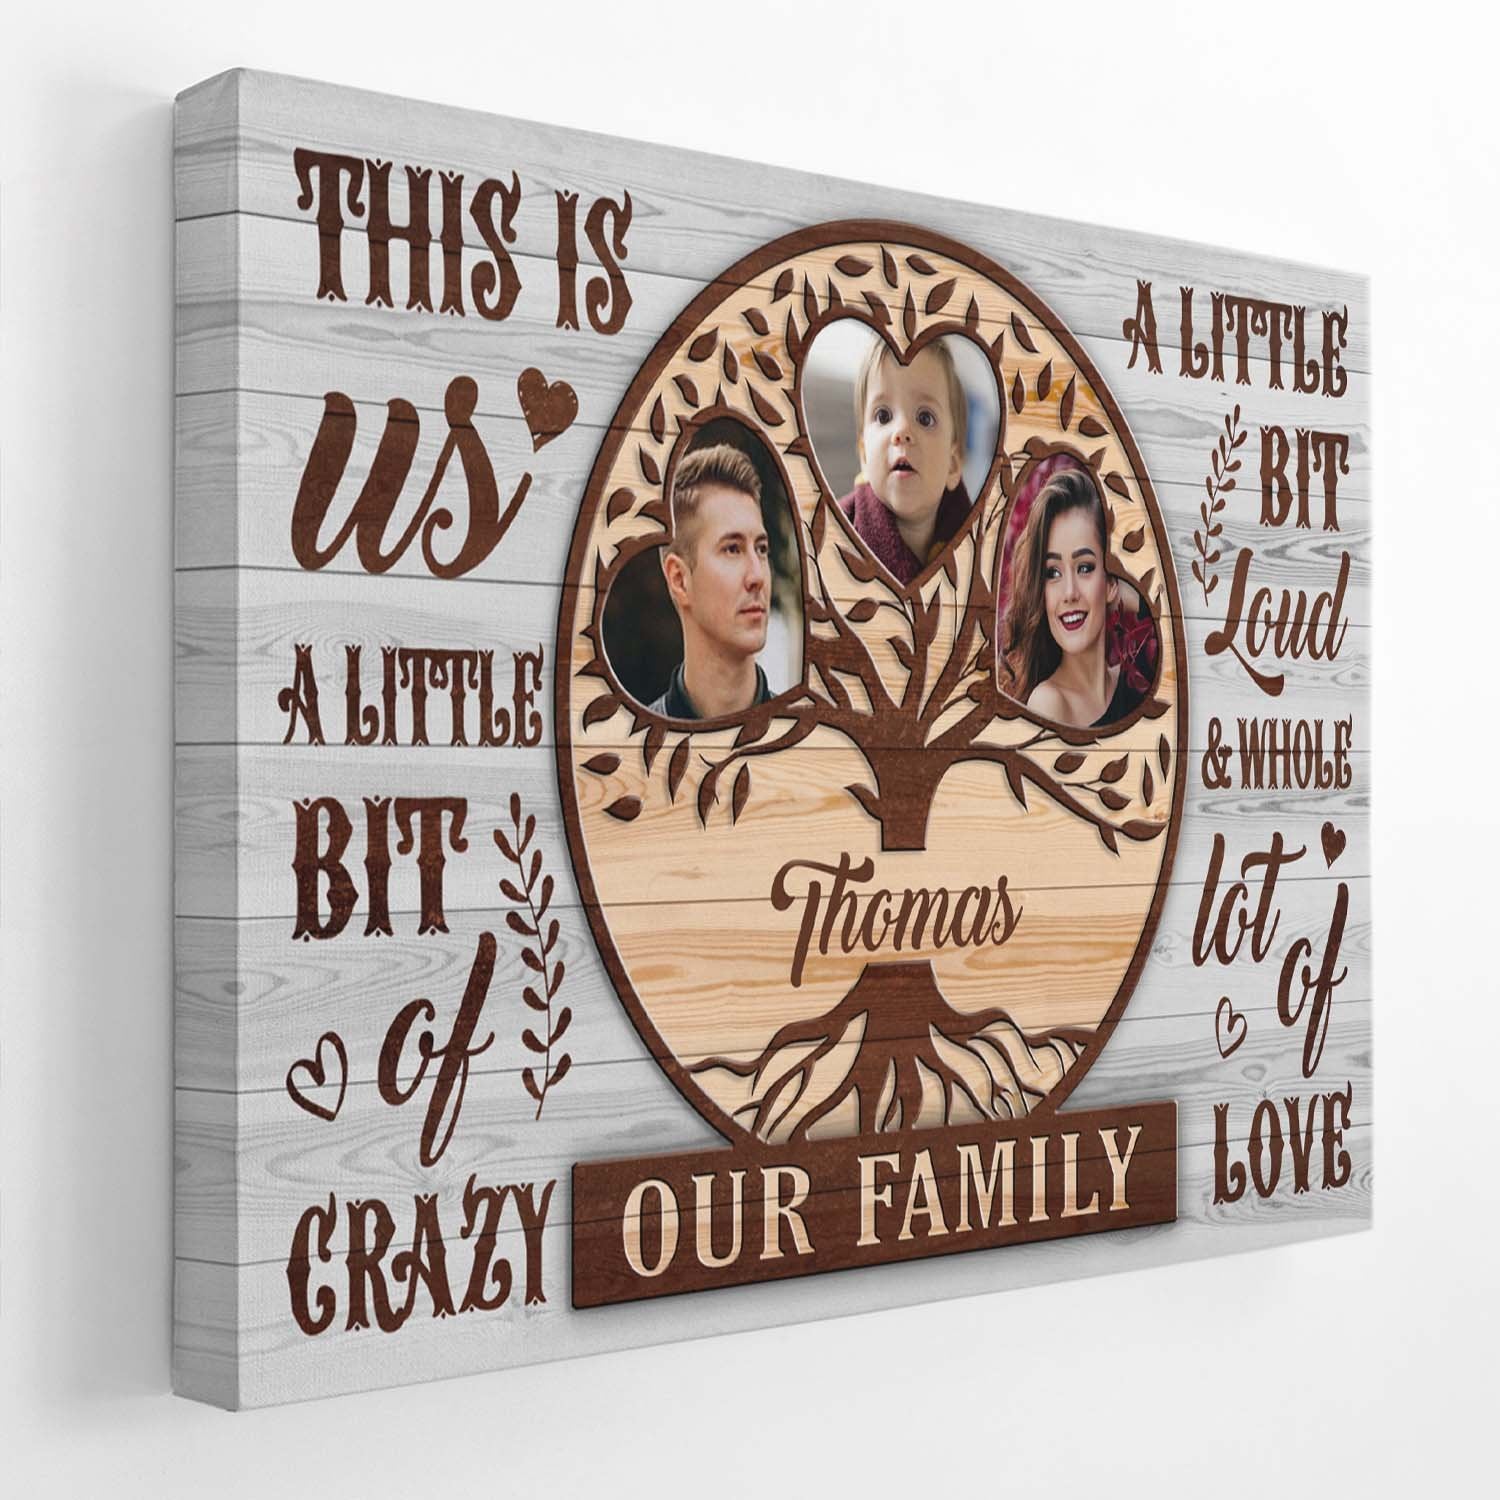 Wallverbs™ Our Family Personalized Picture Frame Photo Tree